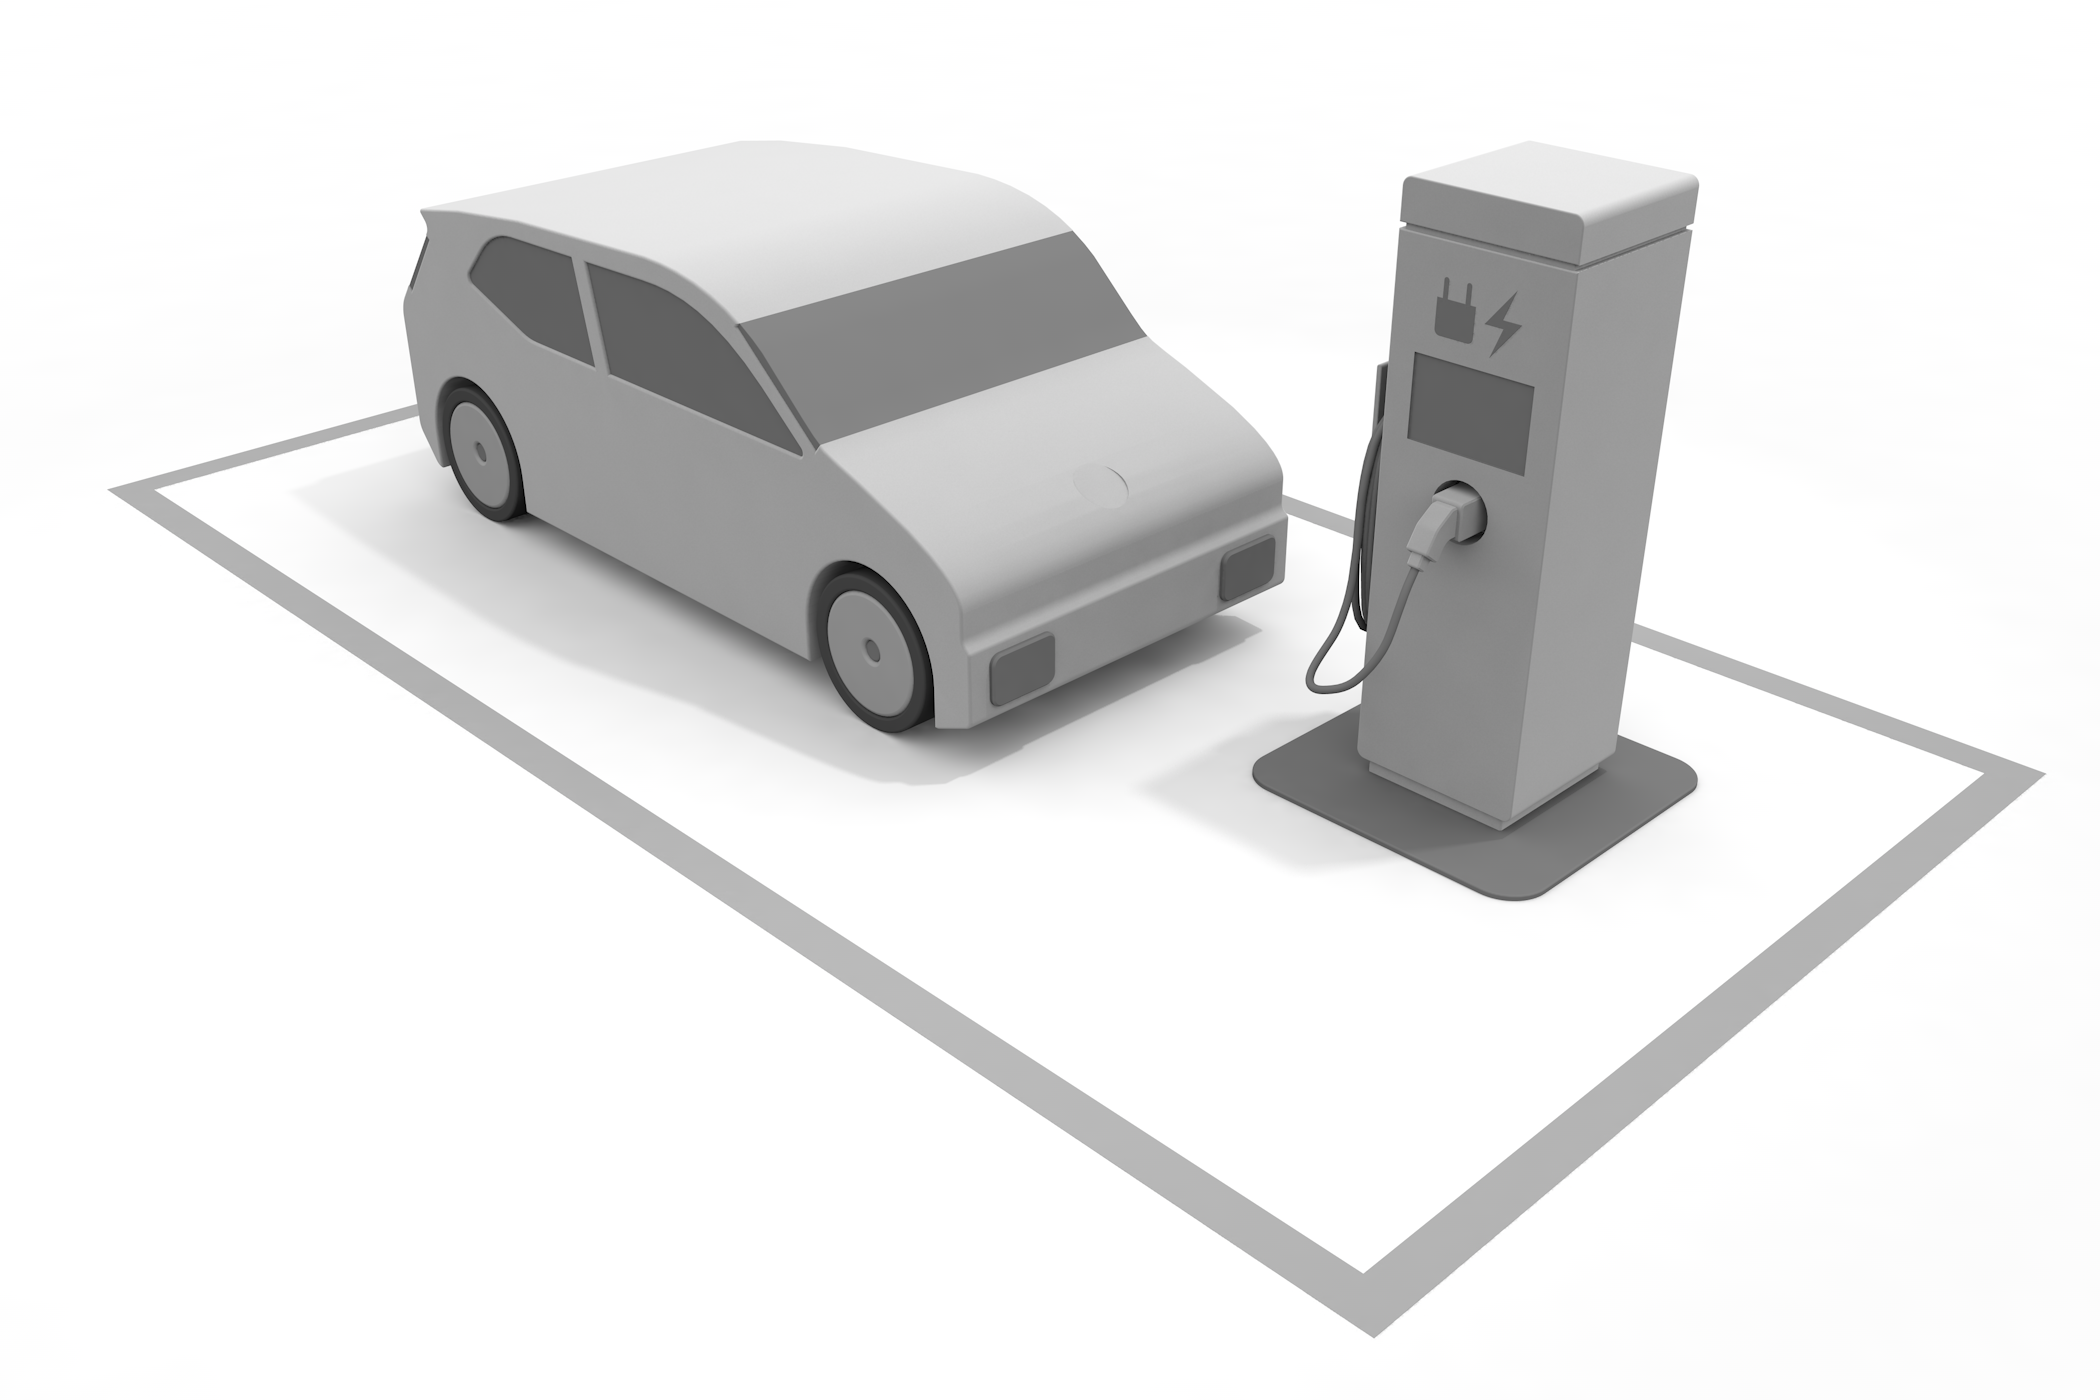 Vehicle / Charging / EV / Charging Cable / Quick Charger-Illustration / 3D Rendering / Free Material / Commercial Use OK